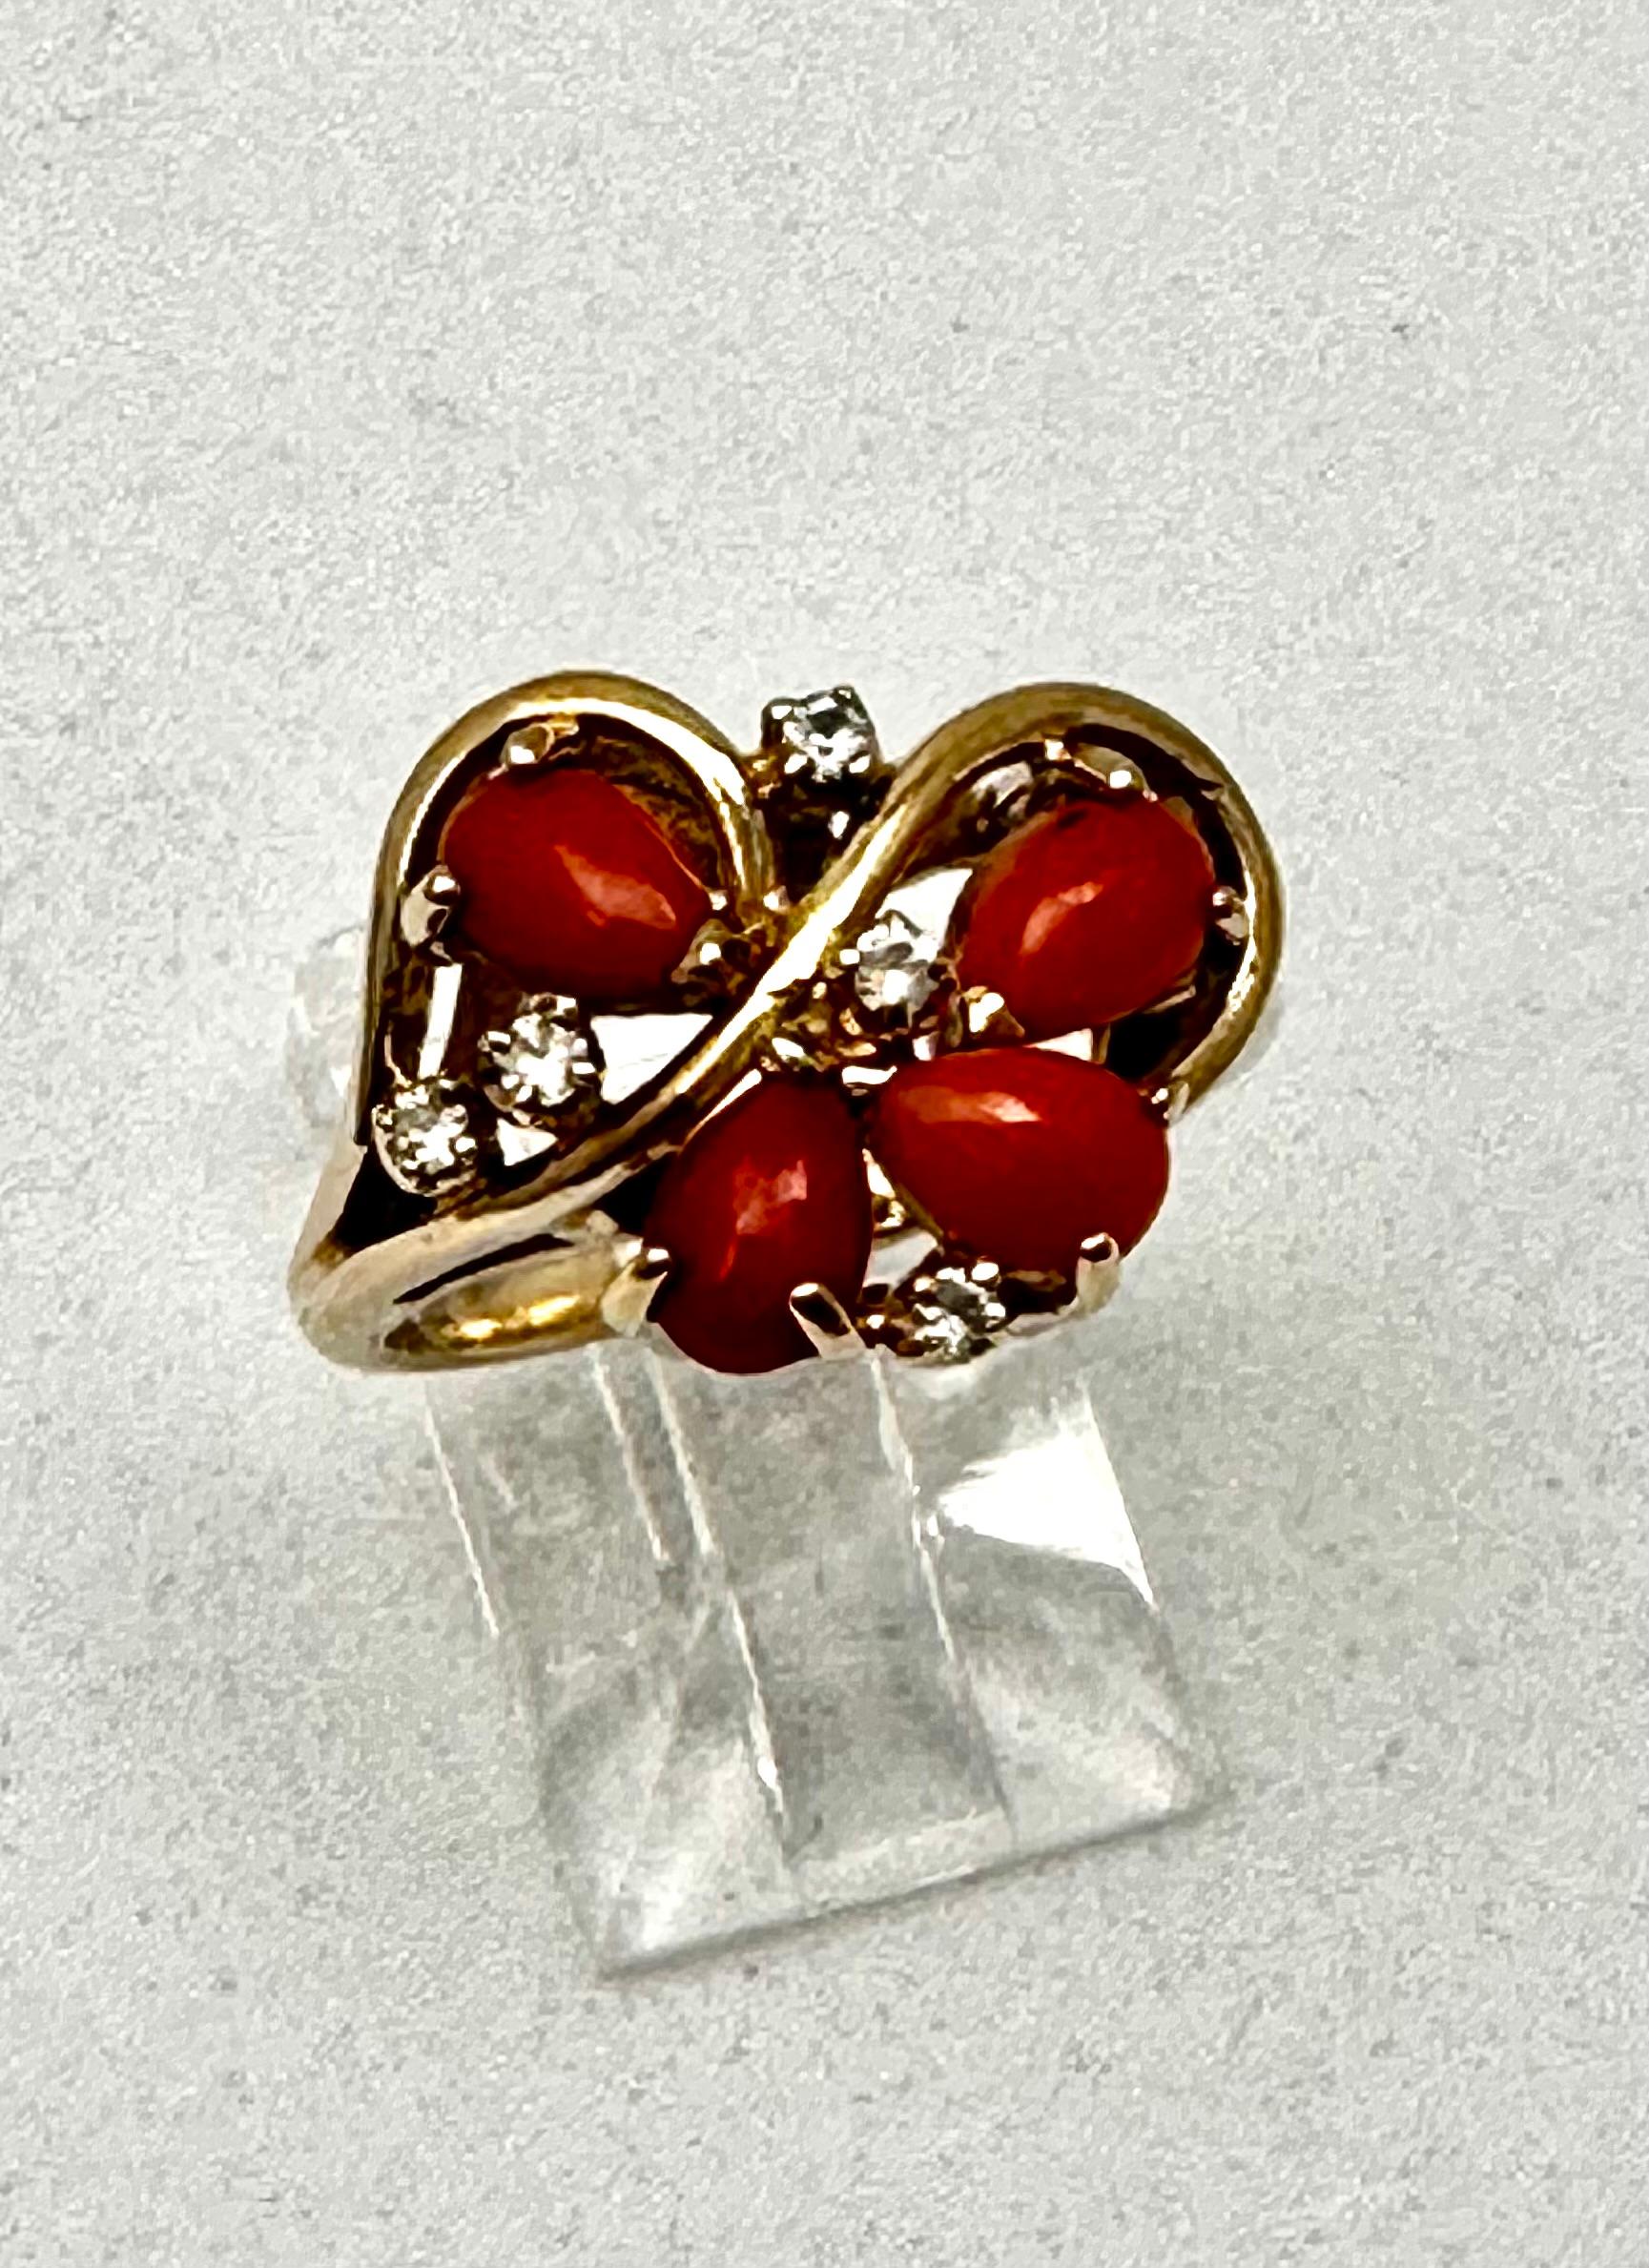 14k Yellow Gold  4 Pear Shaped Coral and Diamonds  Ring Size 6 1/4
Stones are a little more on the salmon color then what shows in photos...pretty ring 

Coral represents happiness and joy and gives the person the ability to appreciate life. Coral